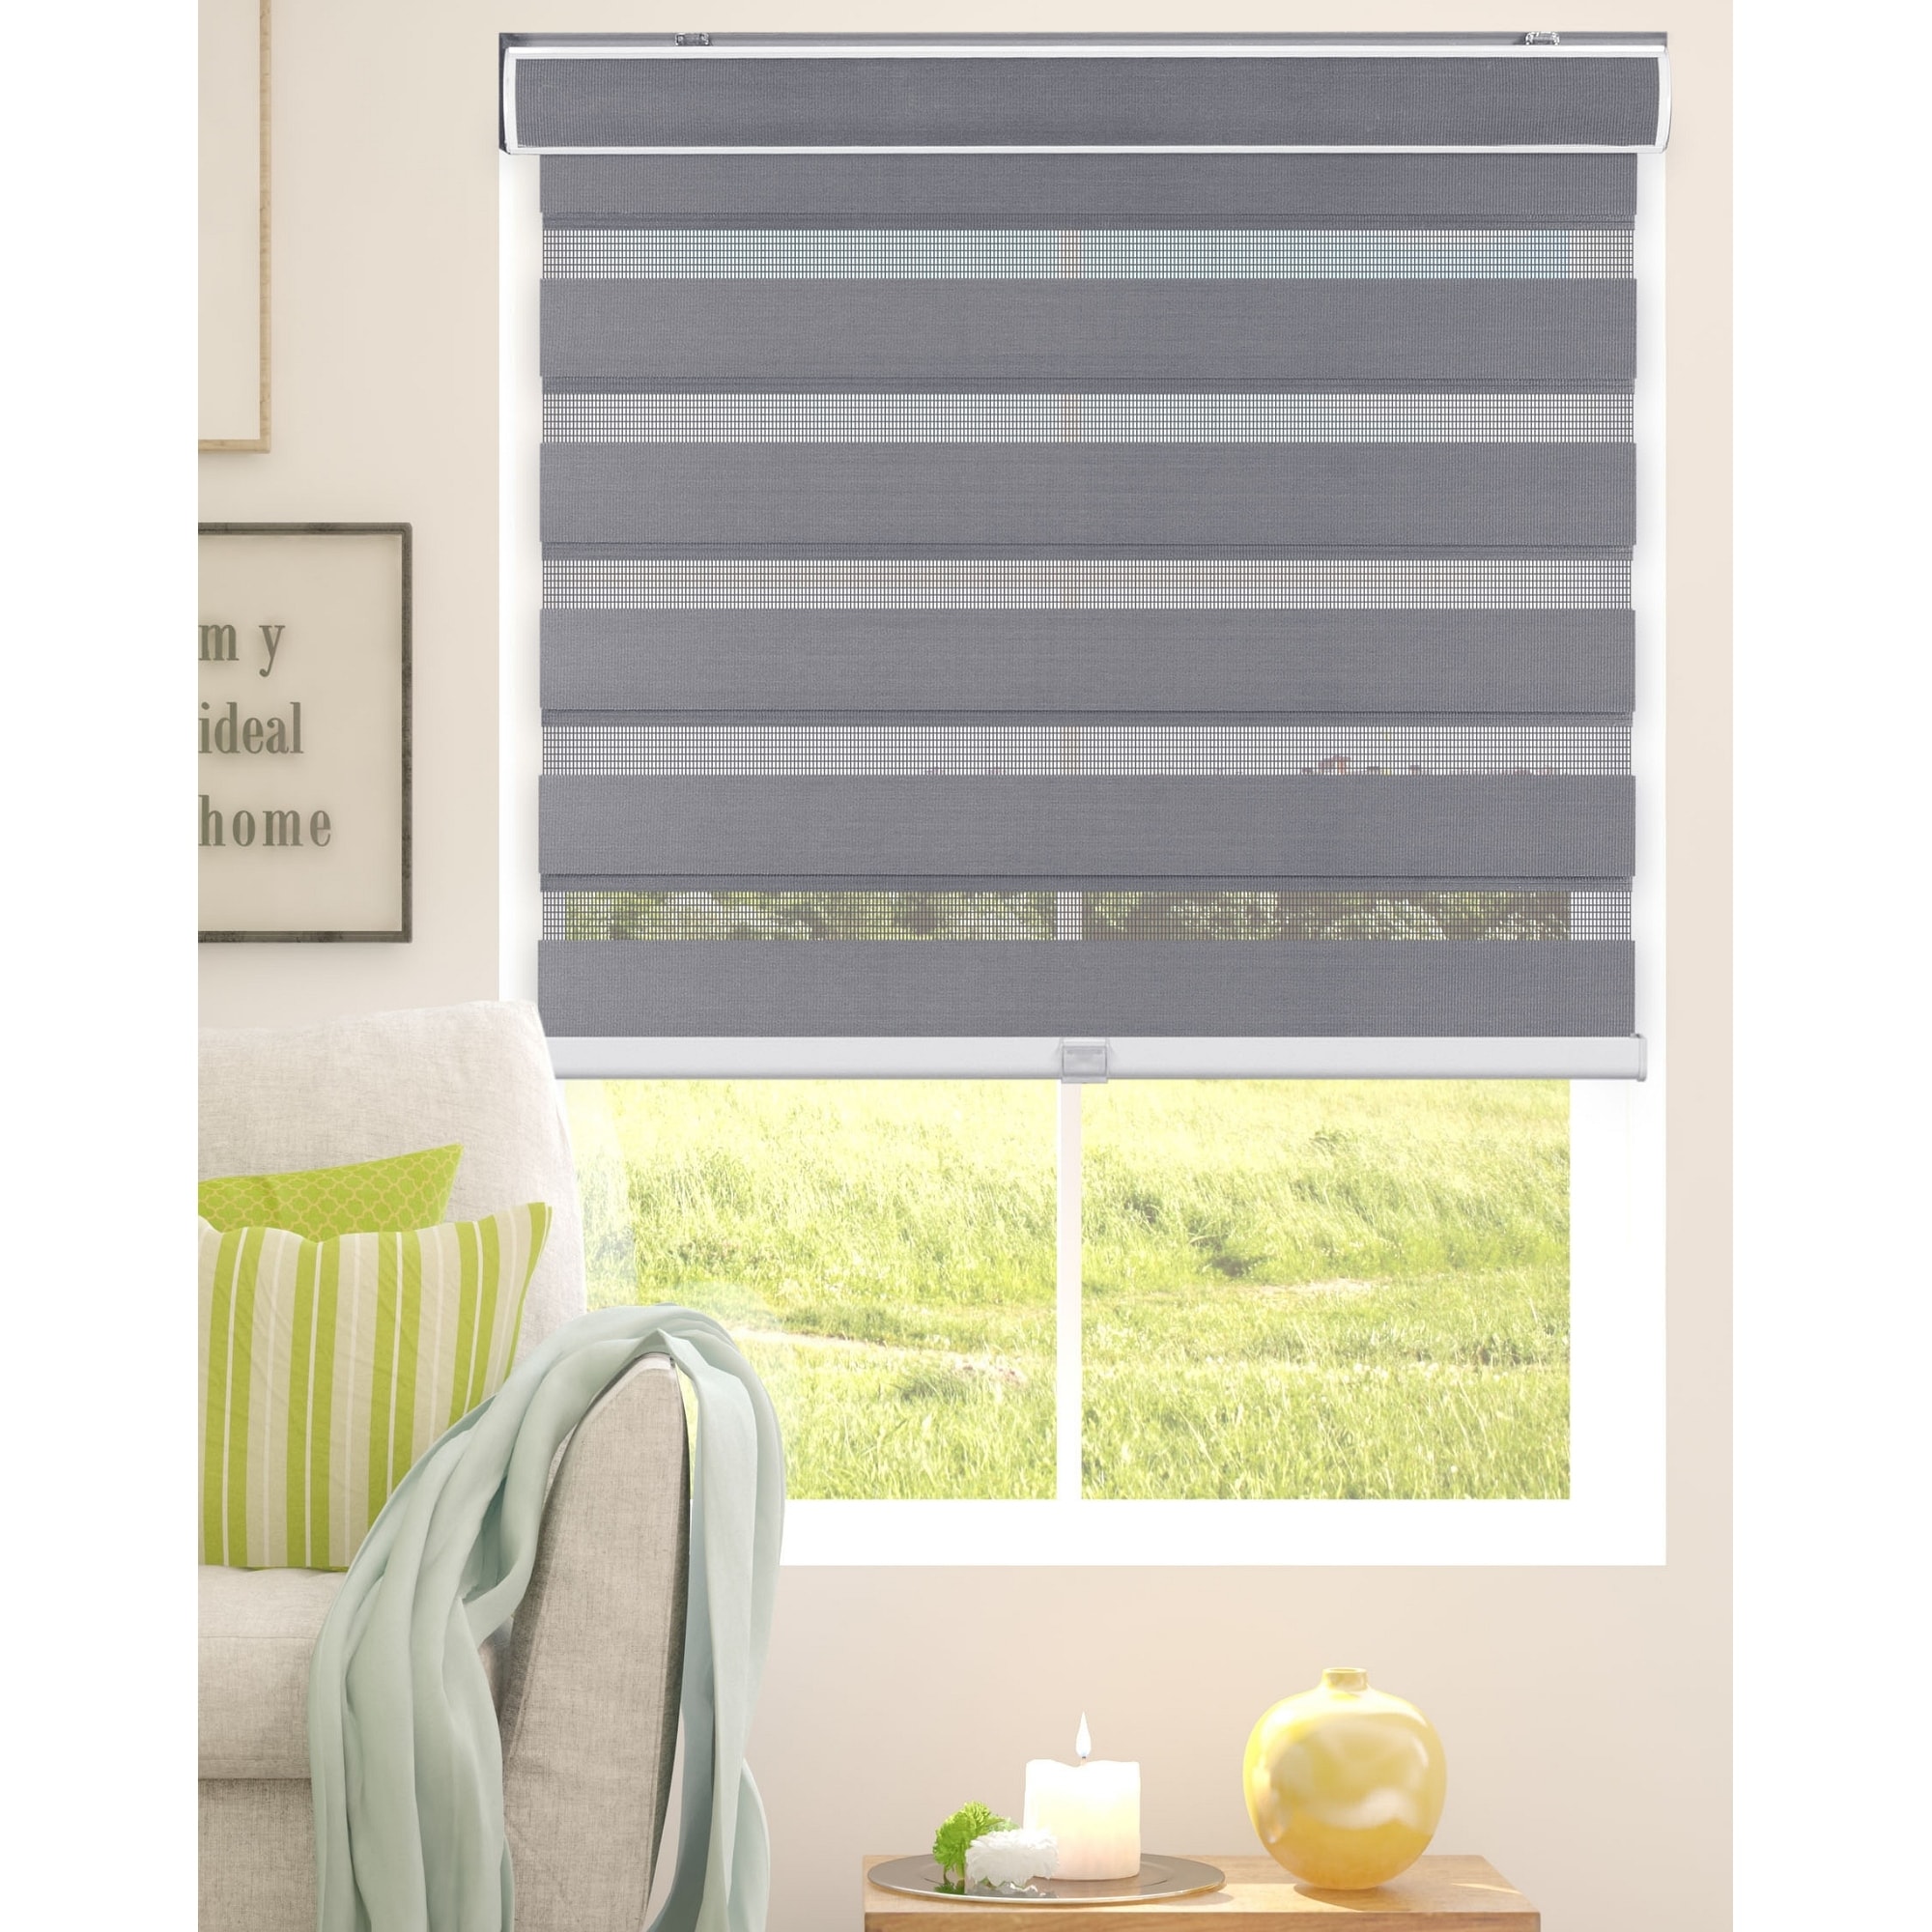 28" x 72" White Zebra Roller Blinds Cordless Dual Layer Shades Sheer or Privacy 